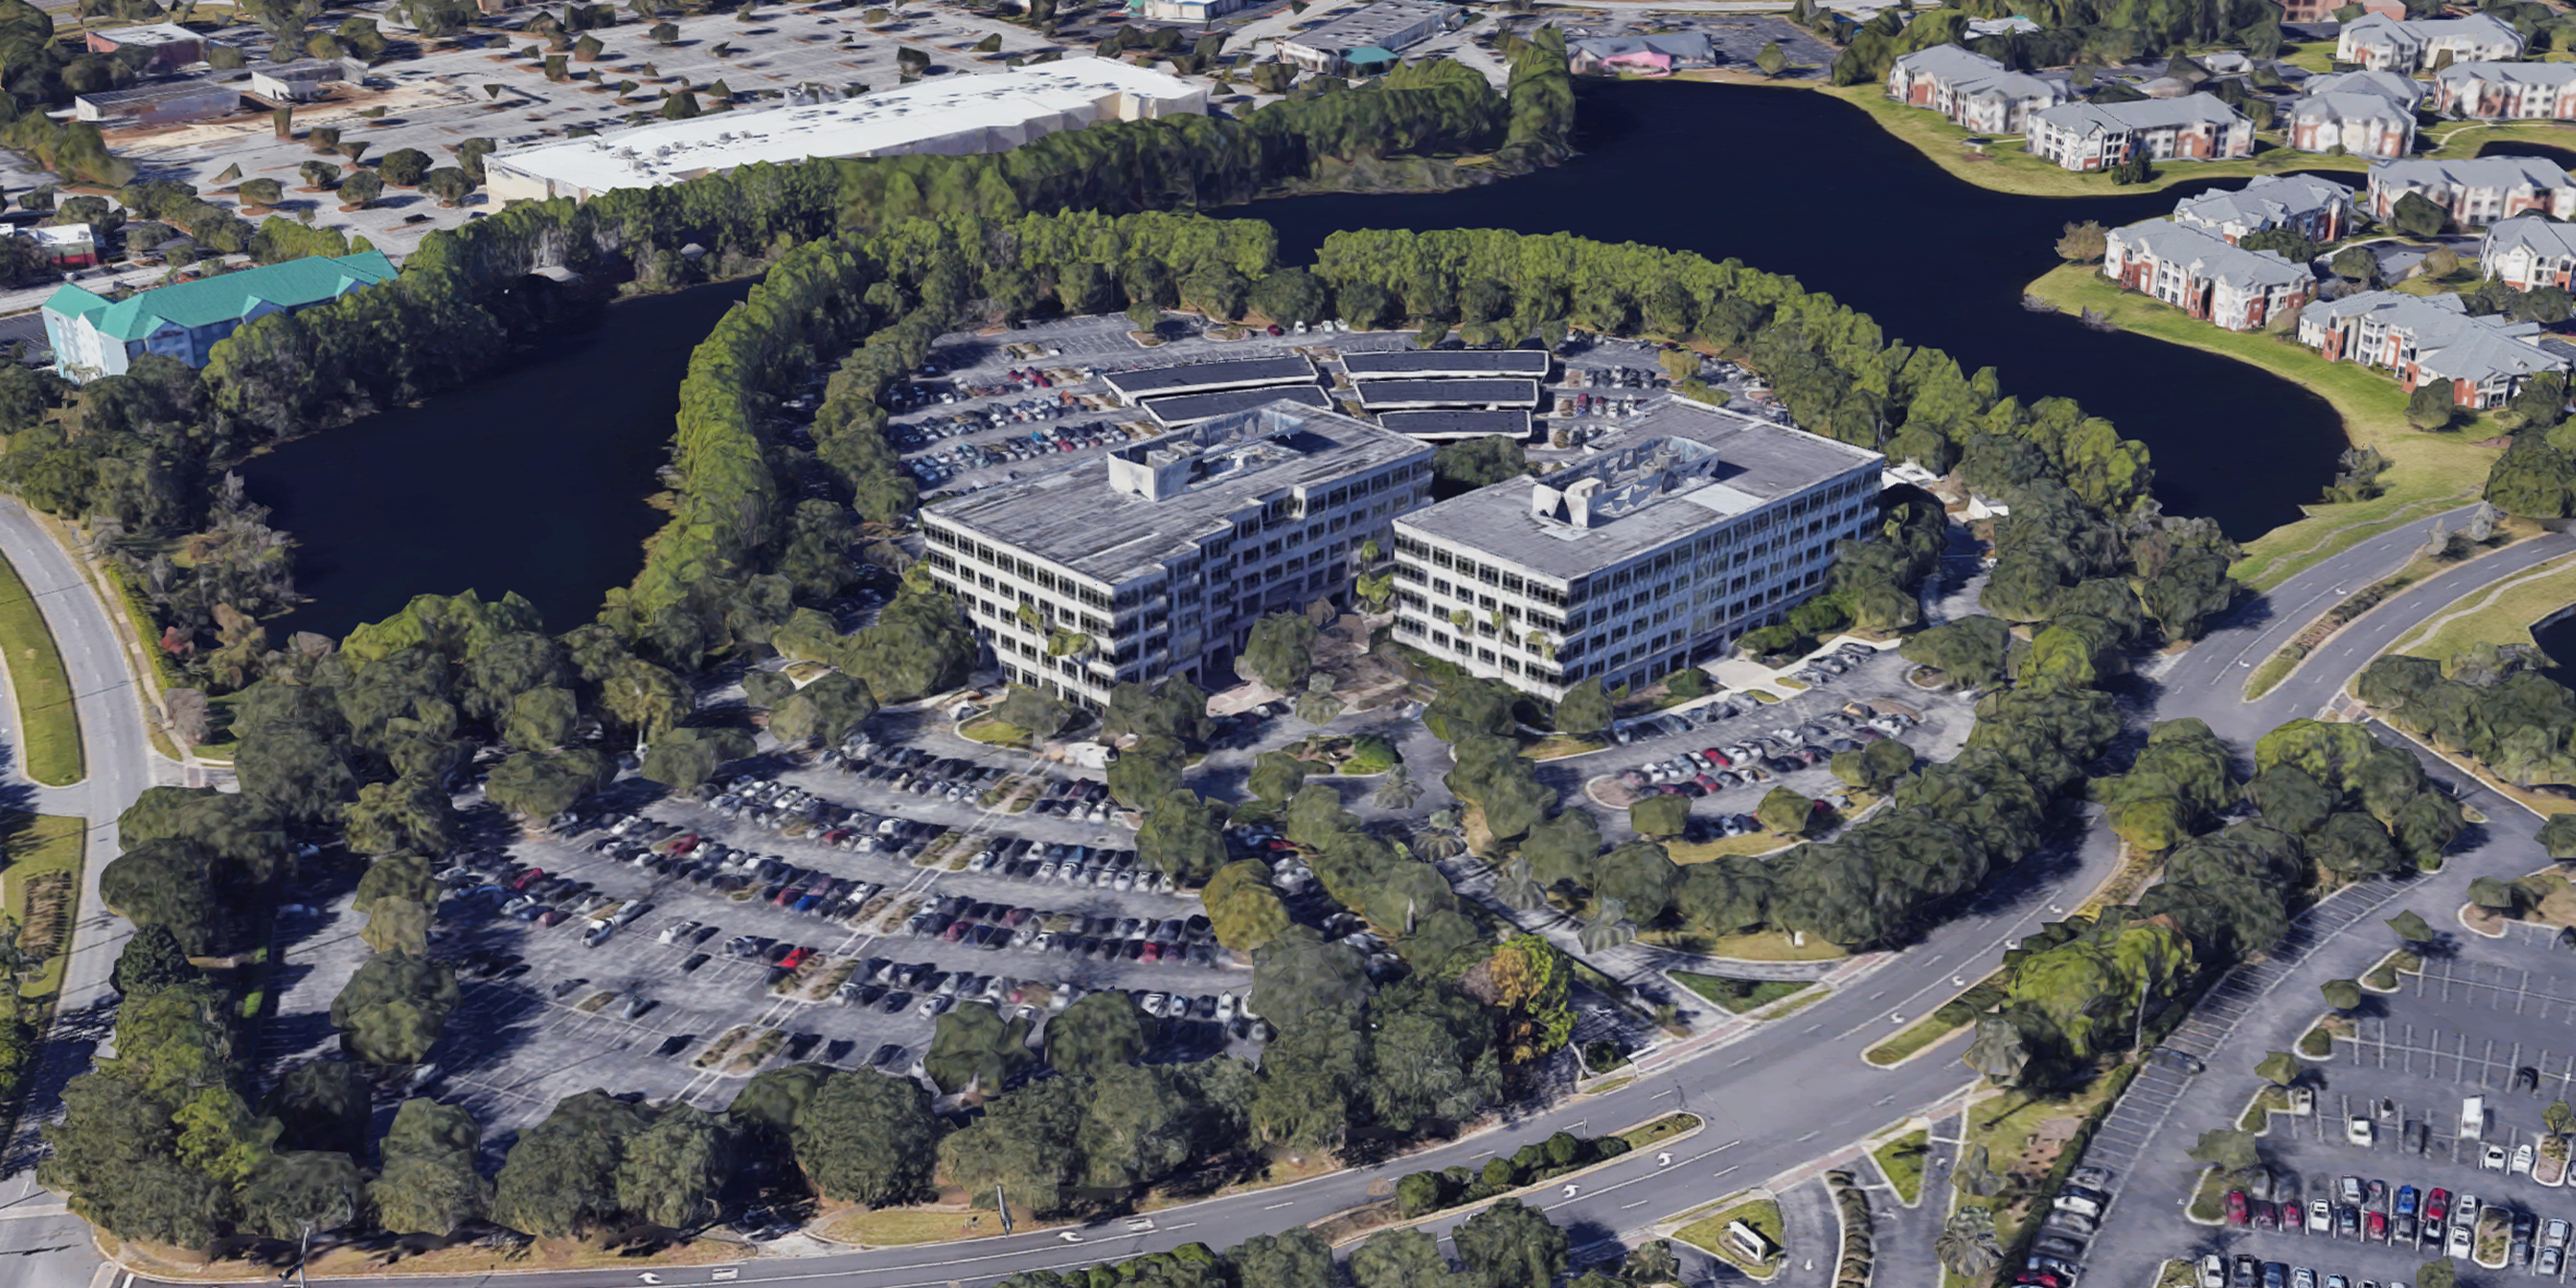 New Headquarters Location for APR Energy. 4600 Touchton Road in Jacksonville, Florida